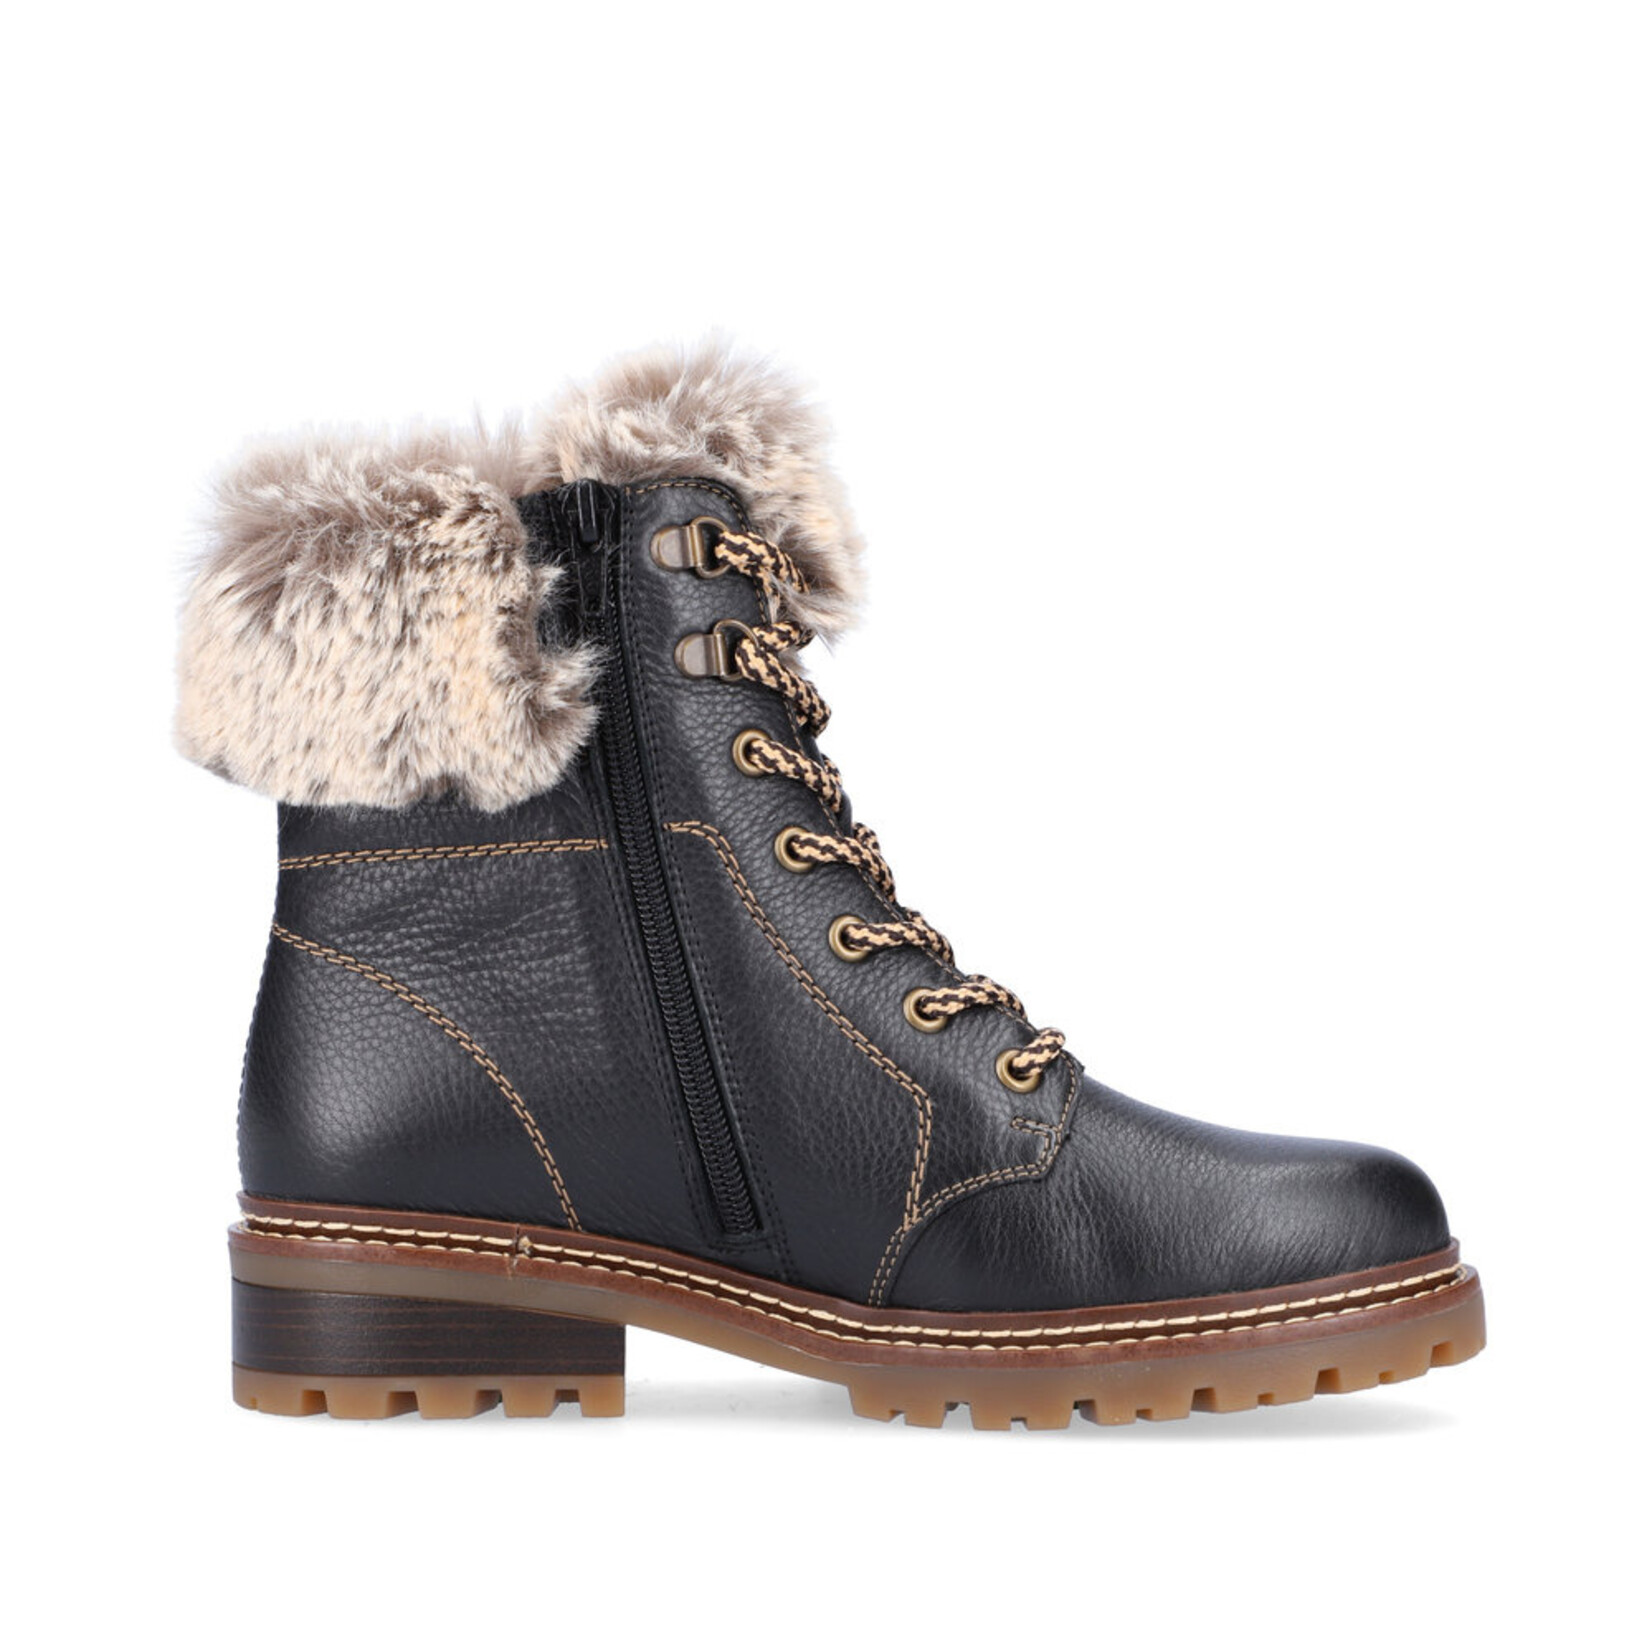 Remonte REMONTE D0B74-01 Winter Ankle Boot